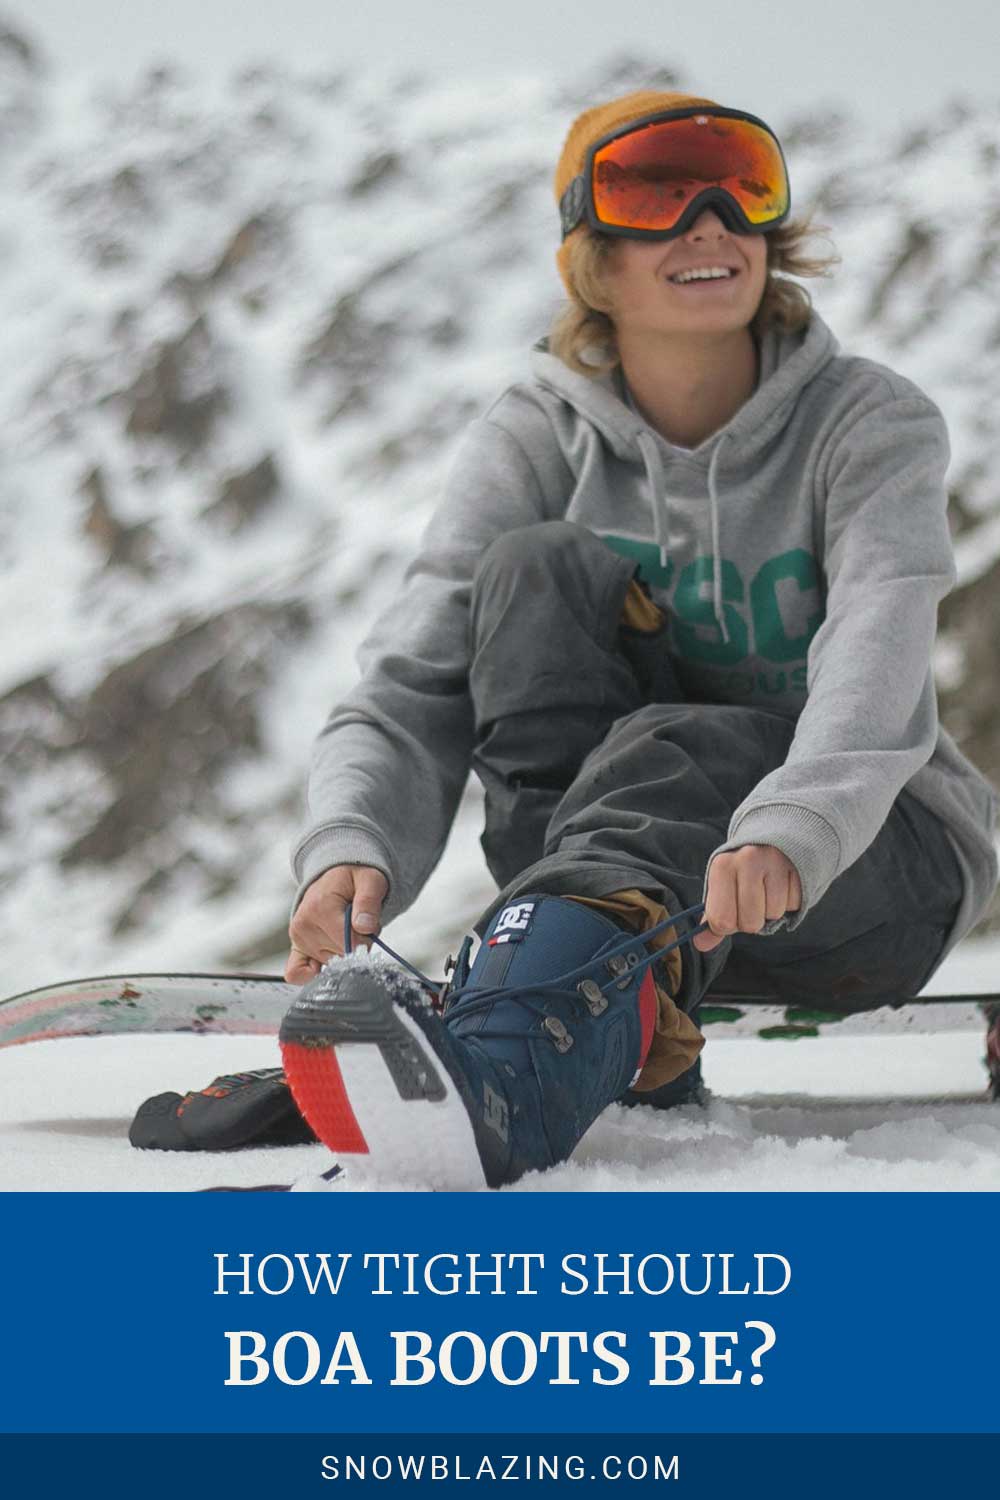 Woman lacing her shoelaces sitting on a snowboard - How Tight Should Boa Boots Be?